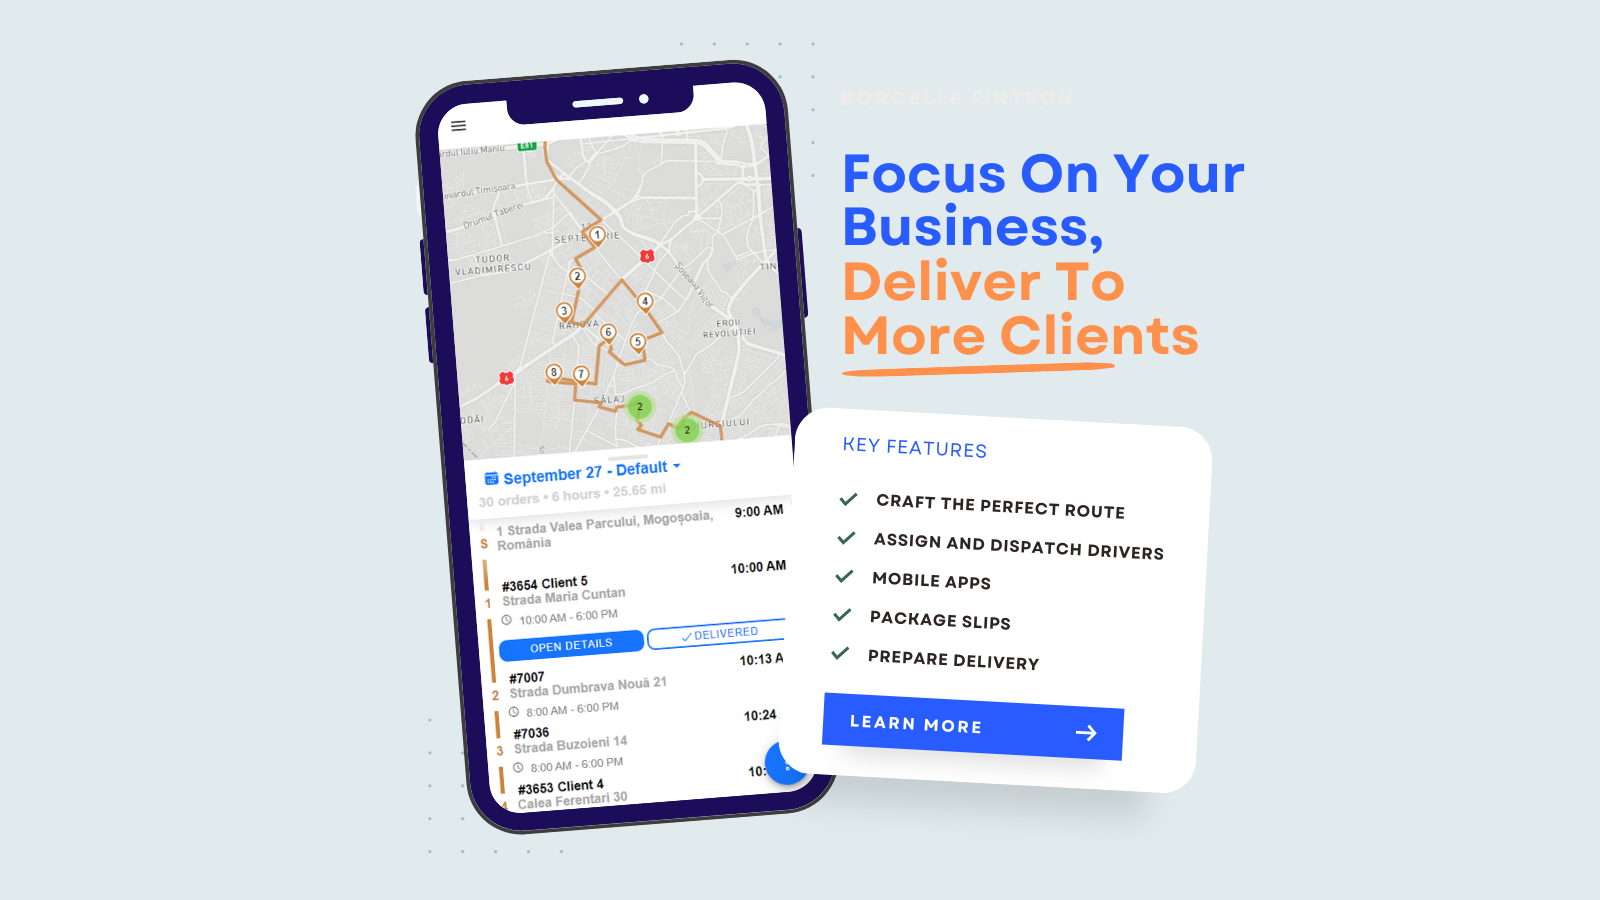 Deliver with our mobile app and track the progress of the routes